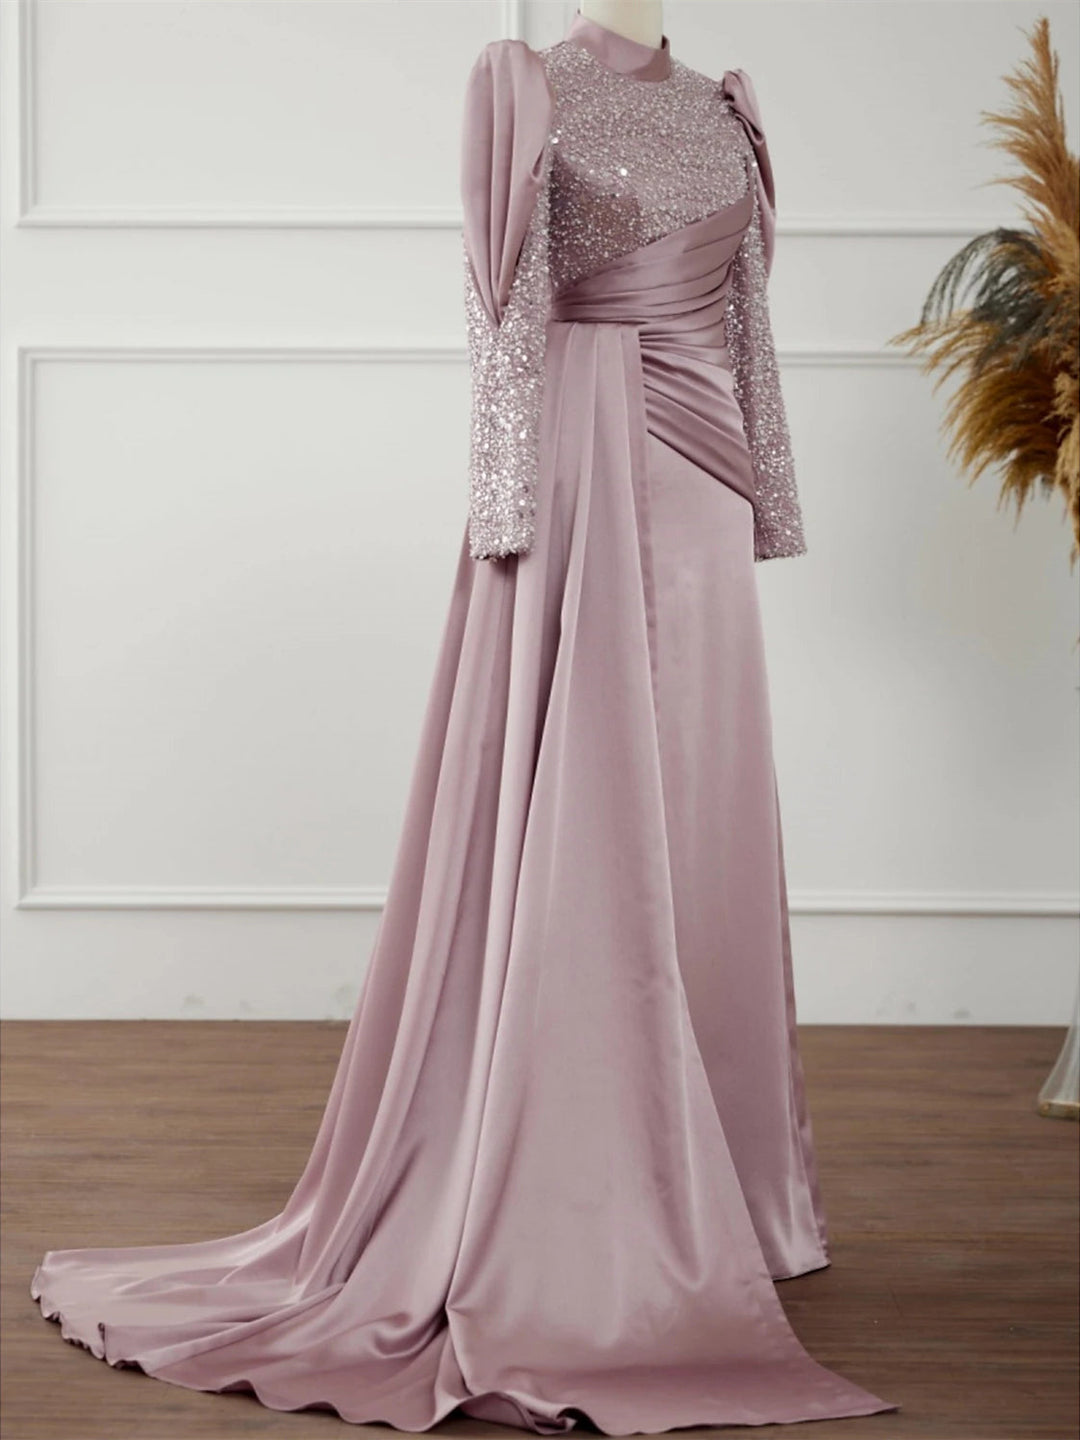 A-Line/Princess Long Sleeves Jewel Neck Evening Dresses With Glitter Pleats Ruched